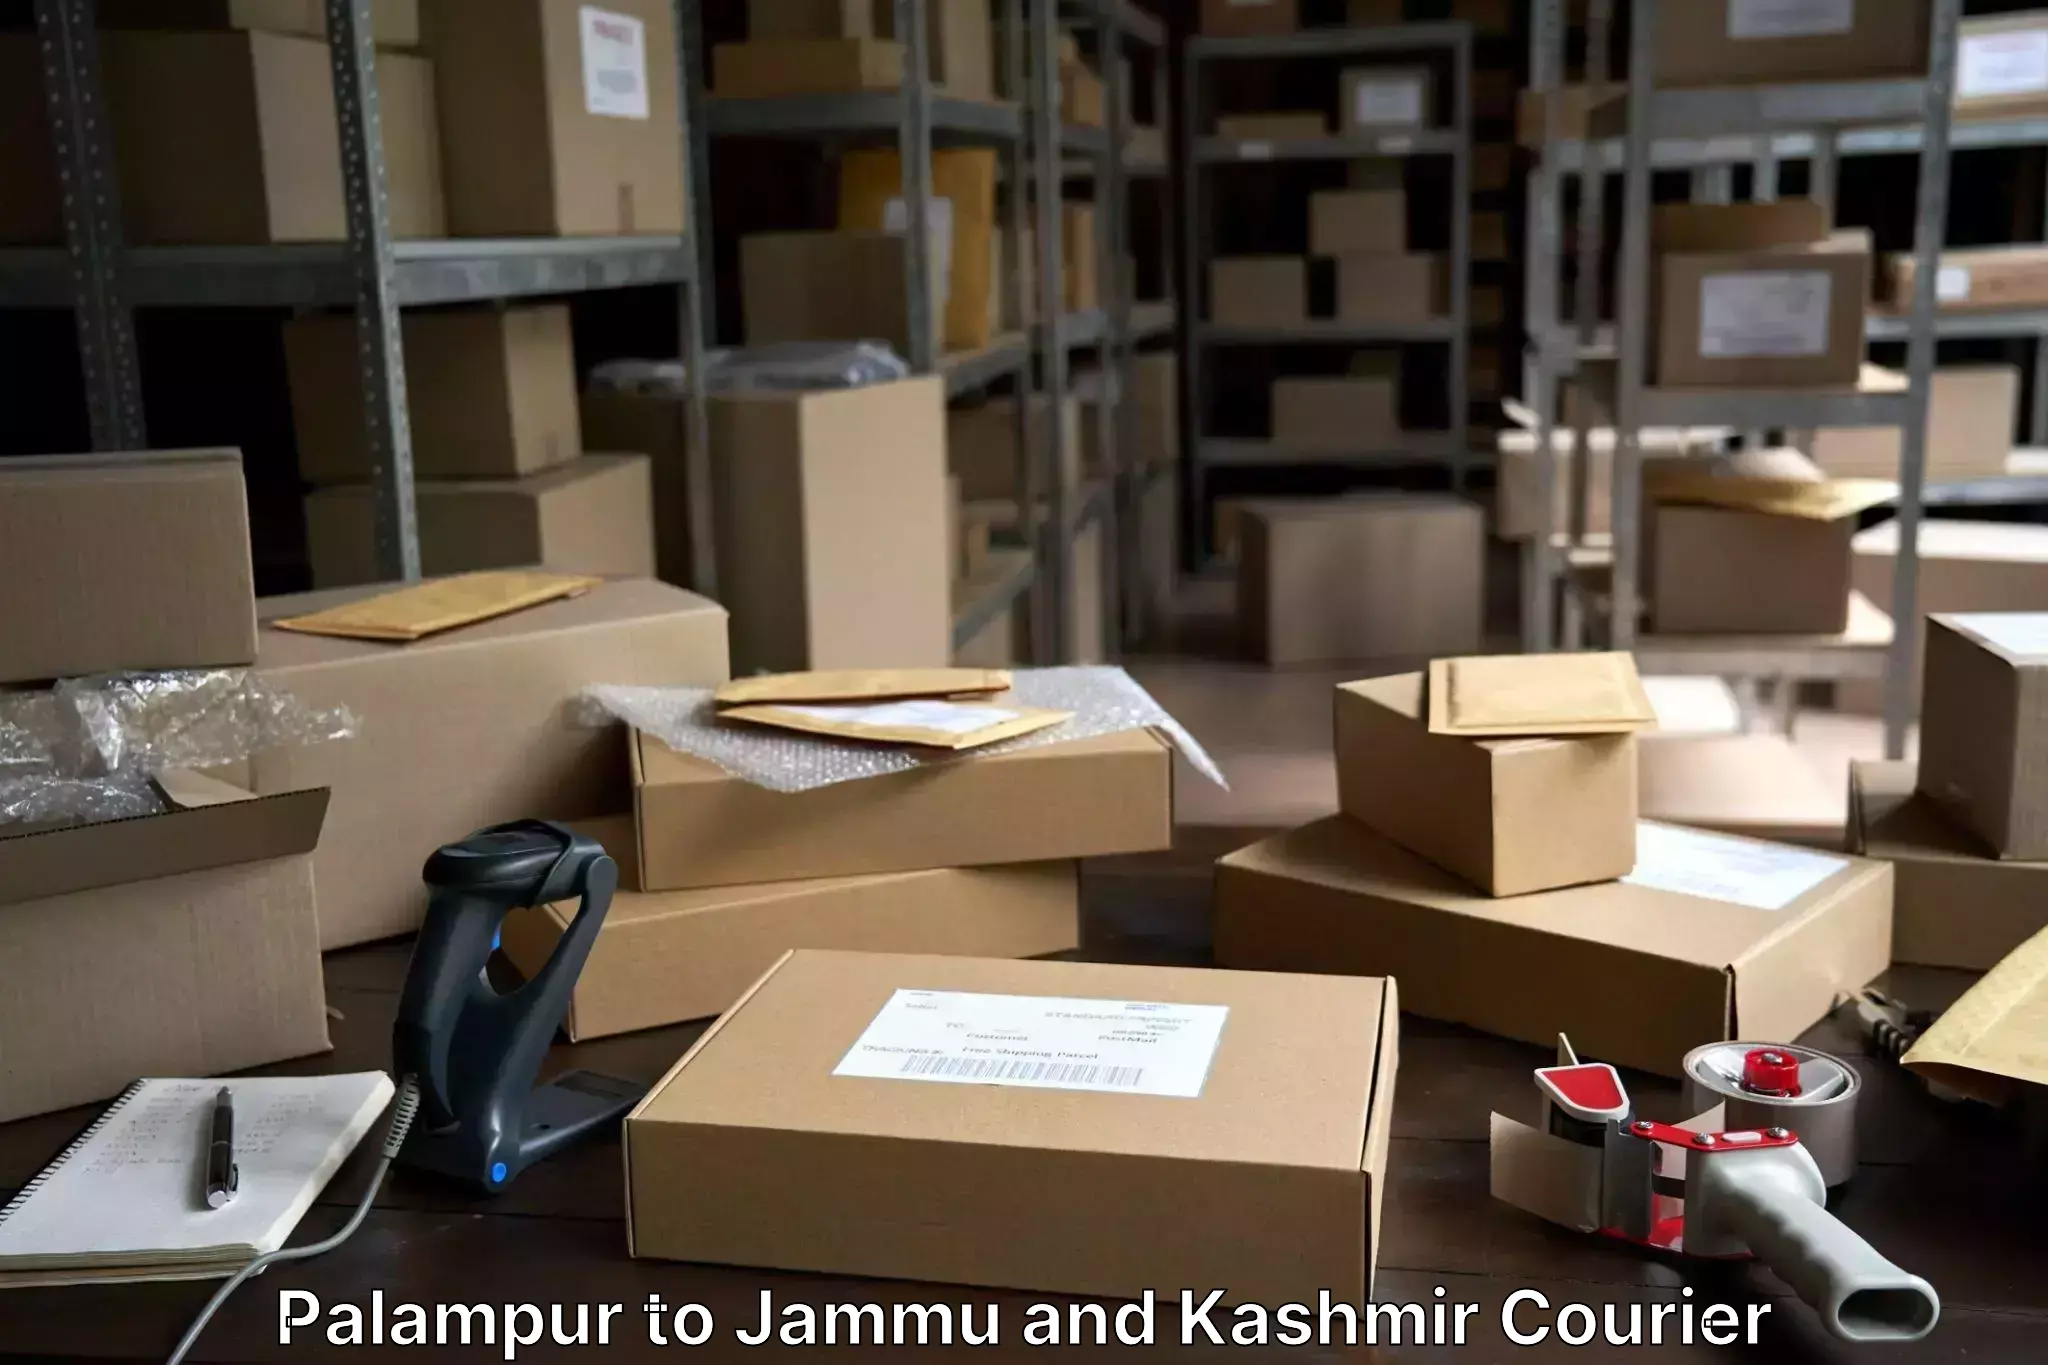 Luggage transport consultancy Palampur to Jammu